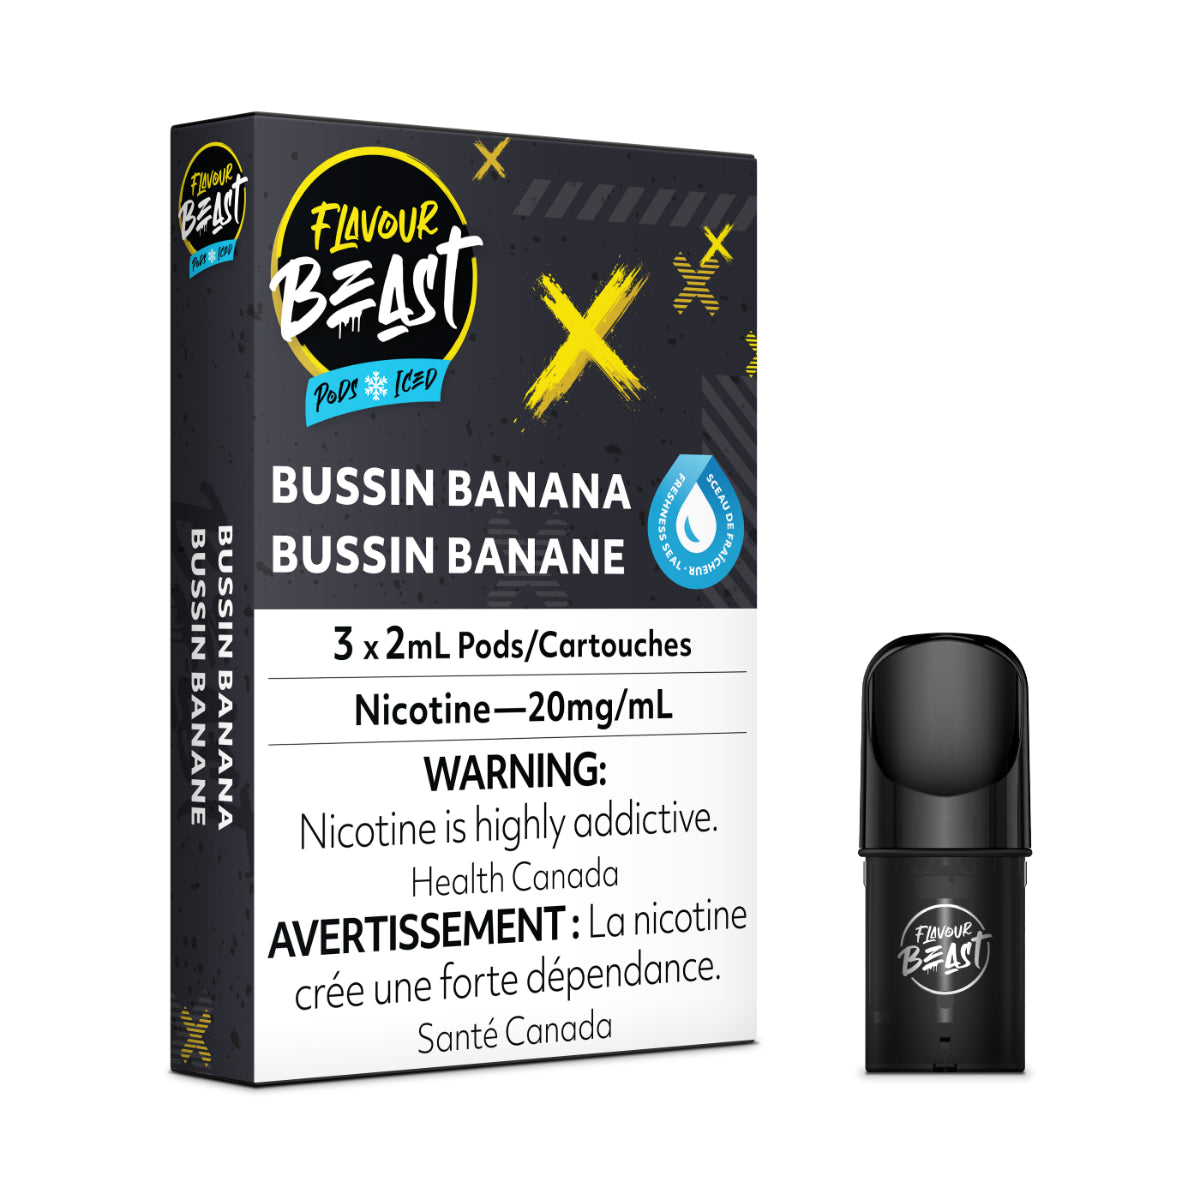 Bussin Banana - Flavour Beast Pod Pack - 20mg - EXCISED